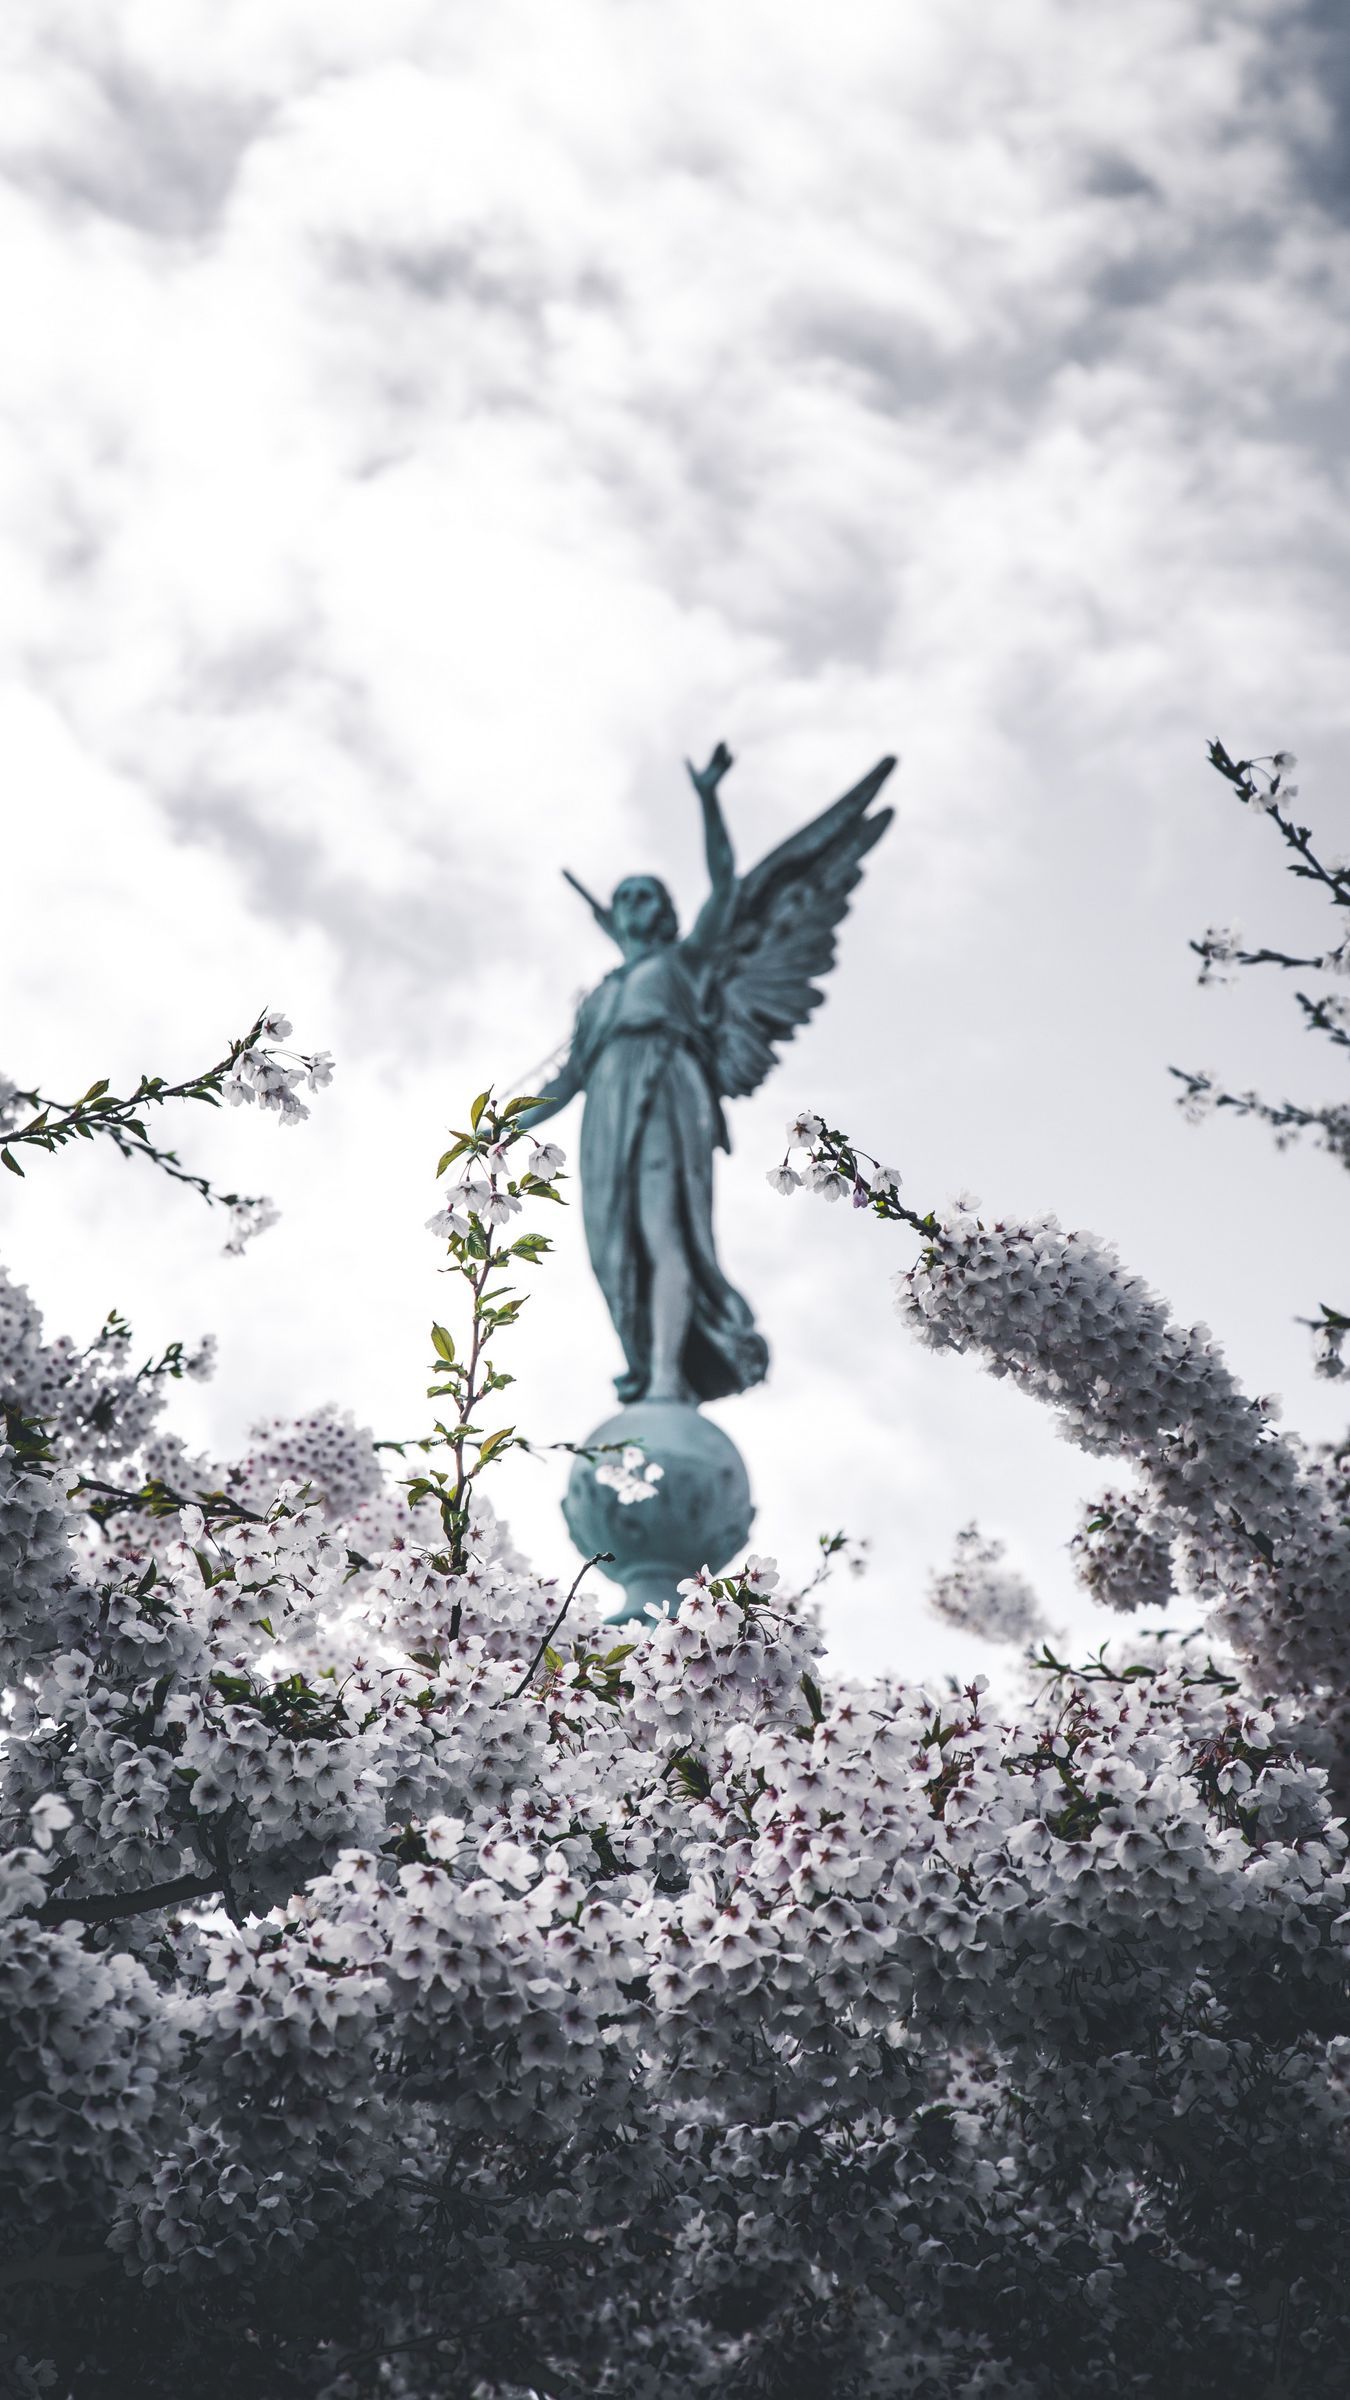 Download wallpaper 1350x2400 sakura, statue, angel, flowers, bloom, branches iphone 8+/7+/6s+/for parallax HD background